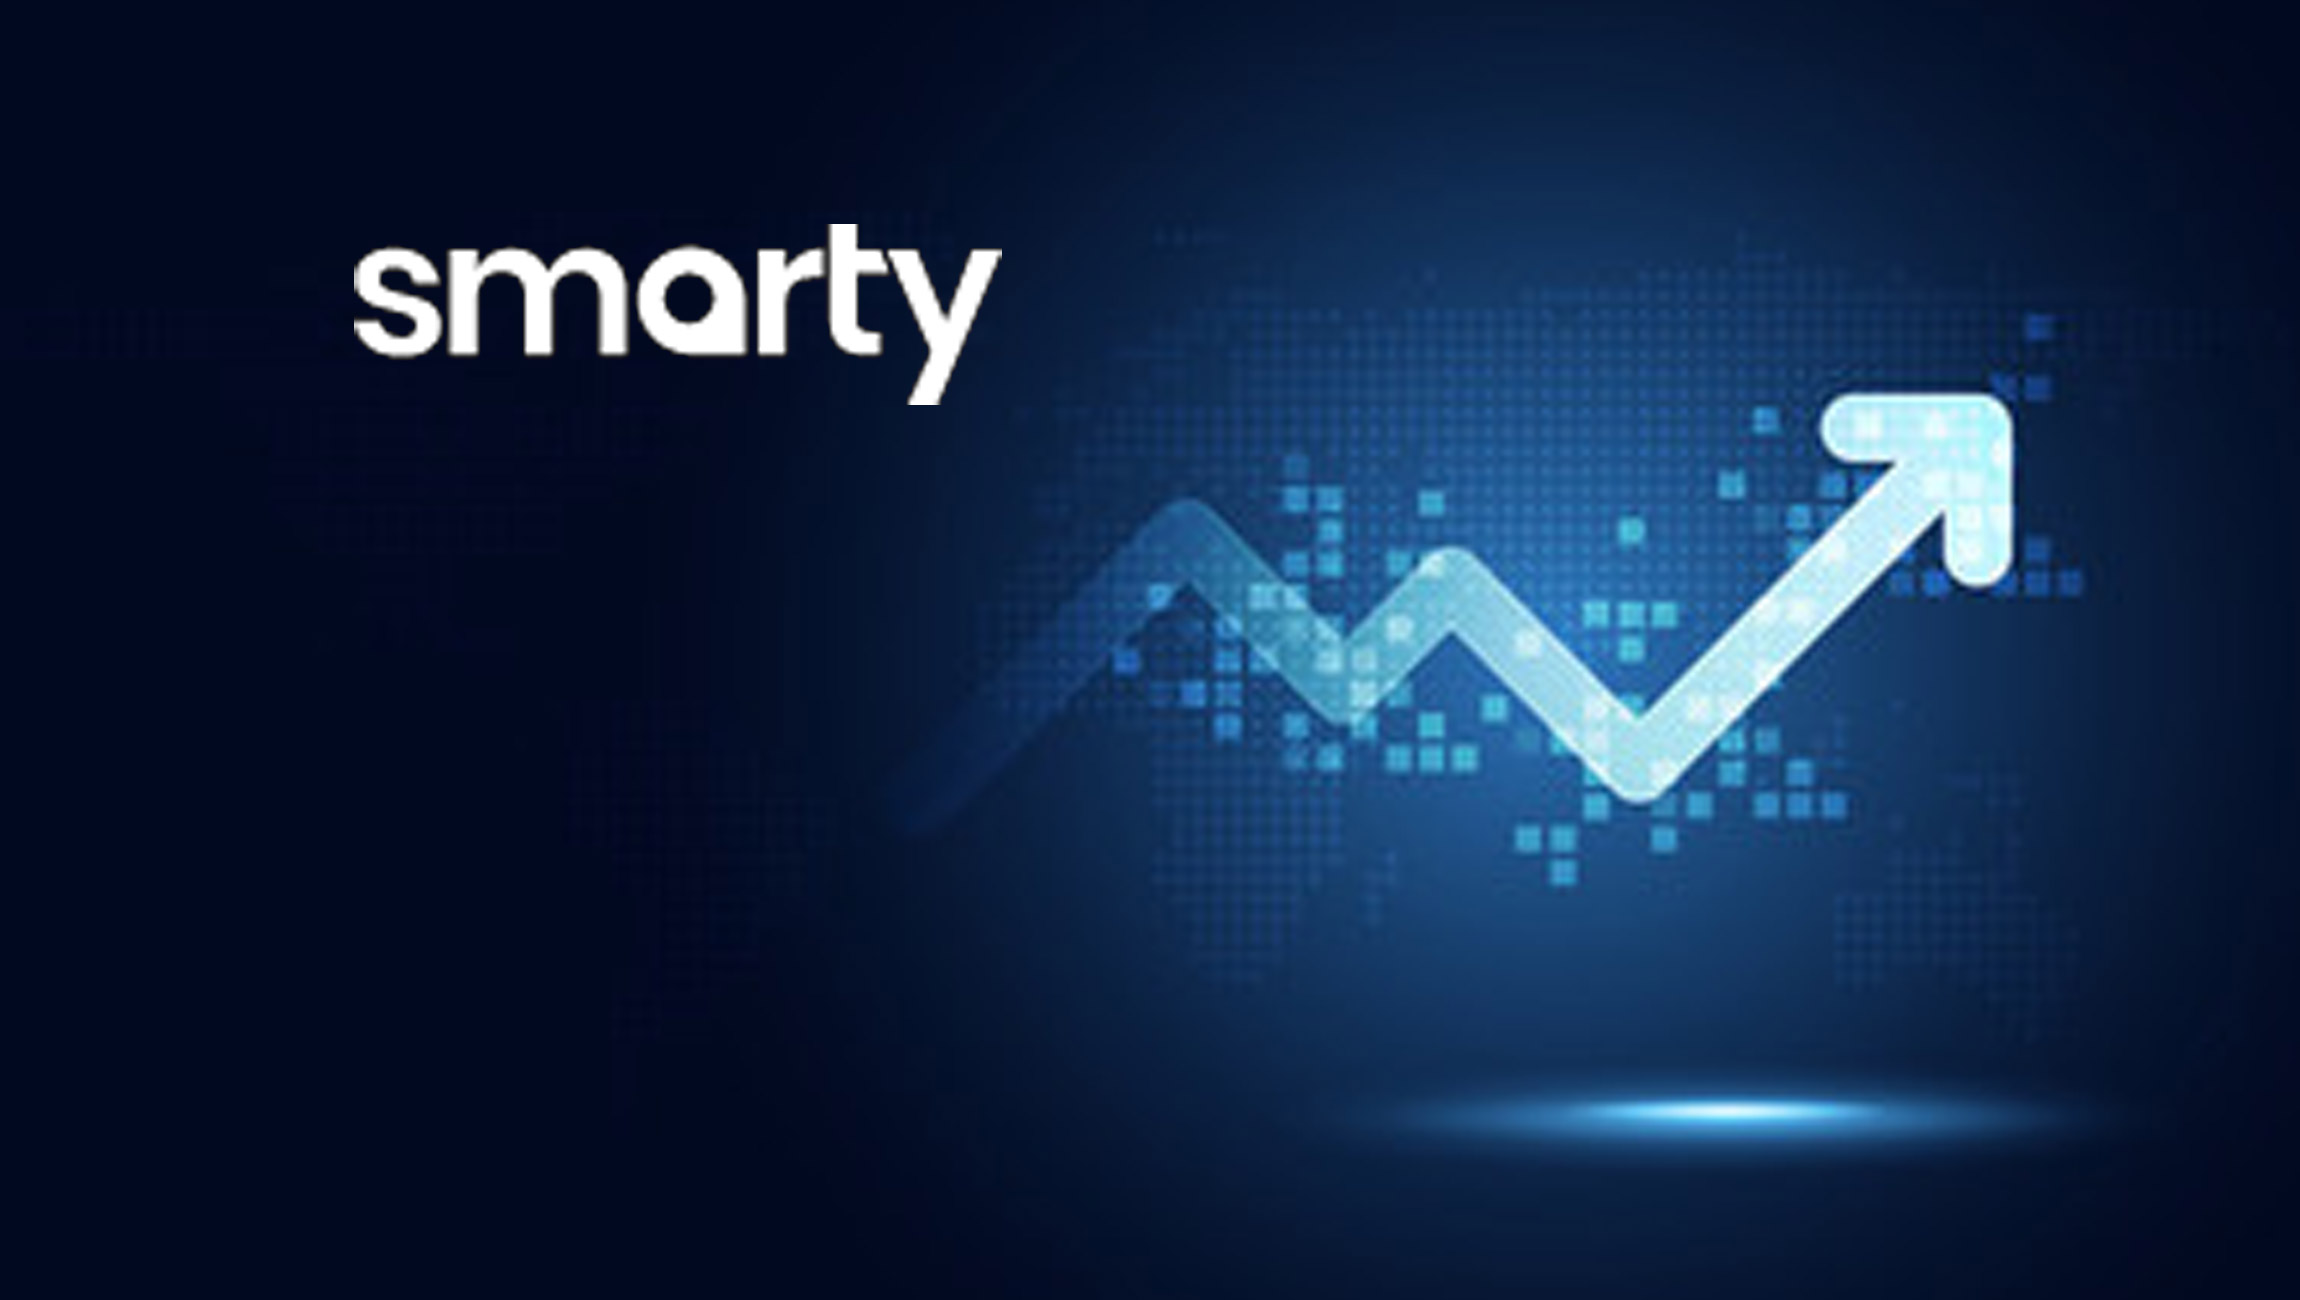 Smarty Named Among Fastest-Growing Companies in Utah Valley by BusinessQ